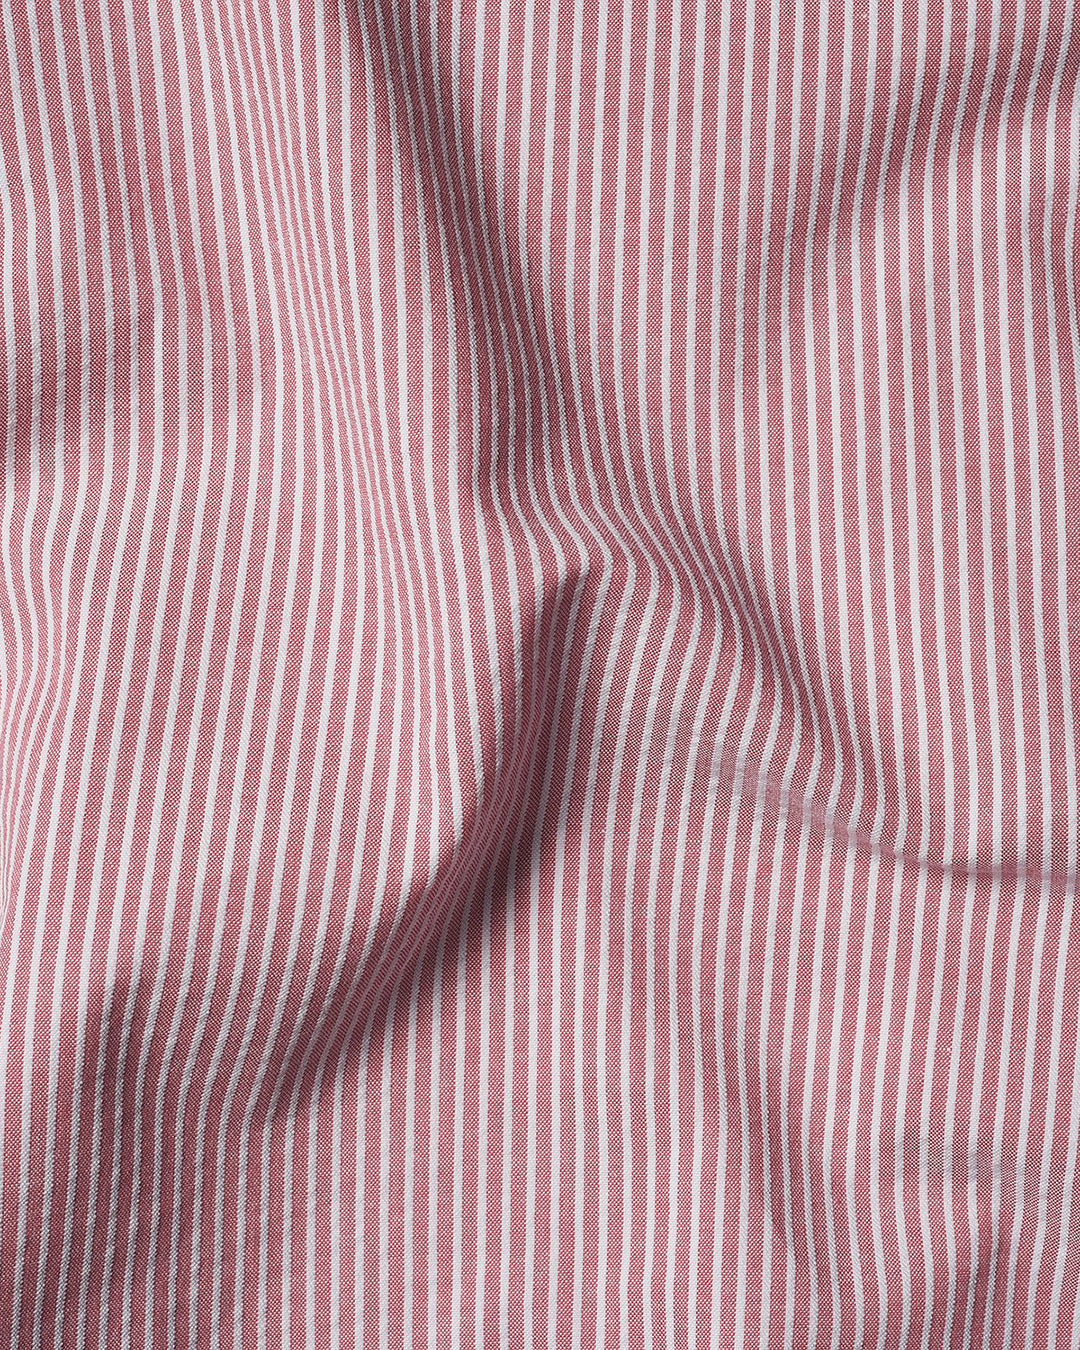 Pullover Shirt in Pale Red White Pin Stripes Seersucker